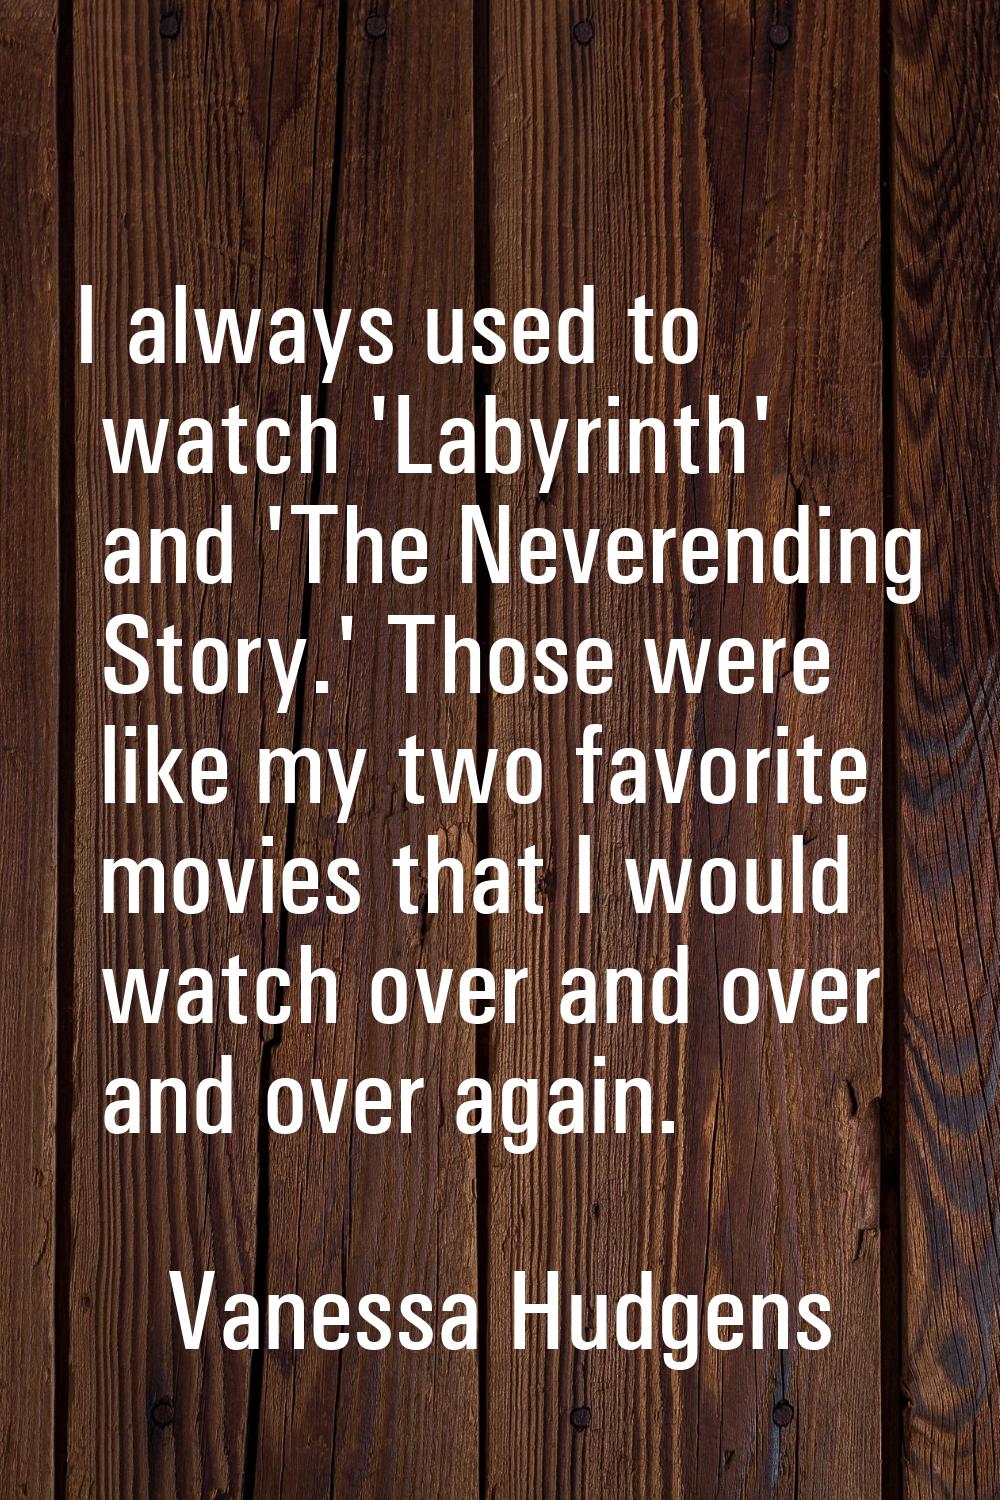 I always used to watch 'Labyrinth' and 'The Neverending Story.' Those were like my two favorite mov